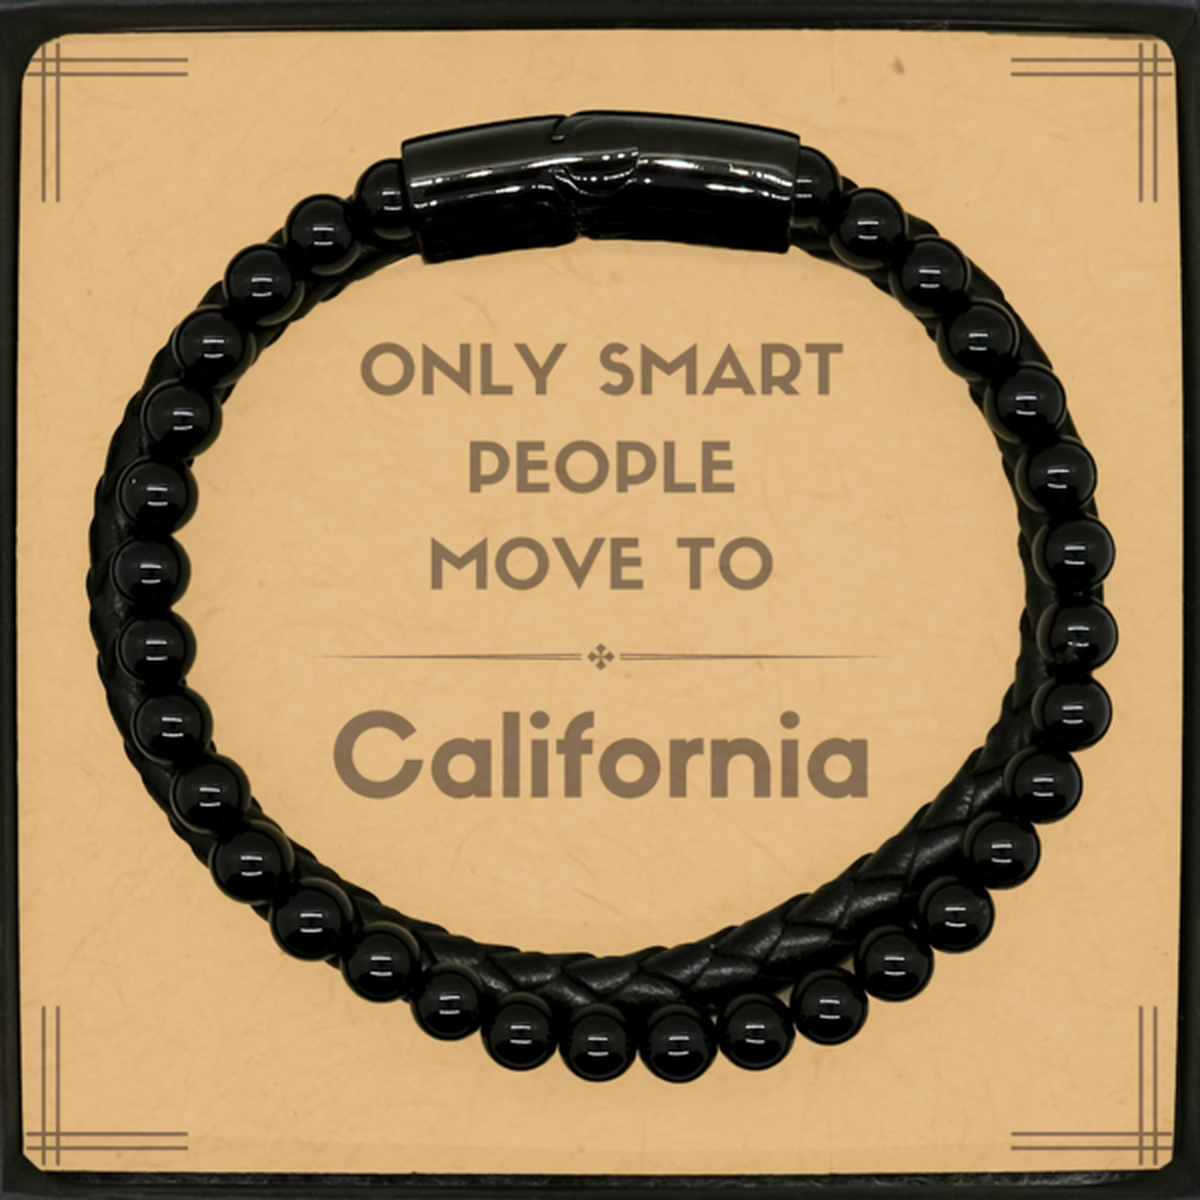 Only smart people move to California Stone Leather Bracelets, Message Card Gifts For California, Move to California Gifts for Friends Coworker Funny Saying Quote